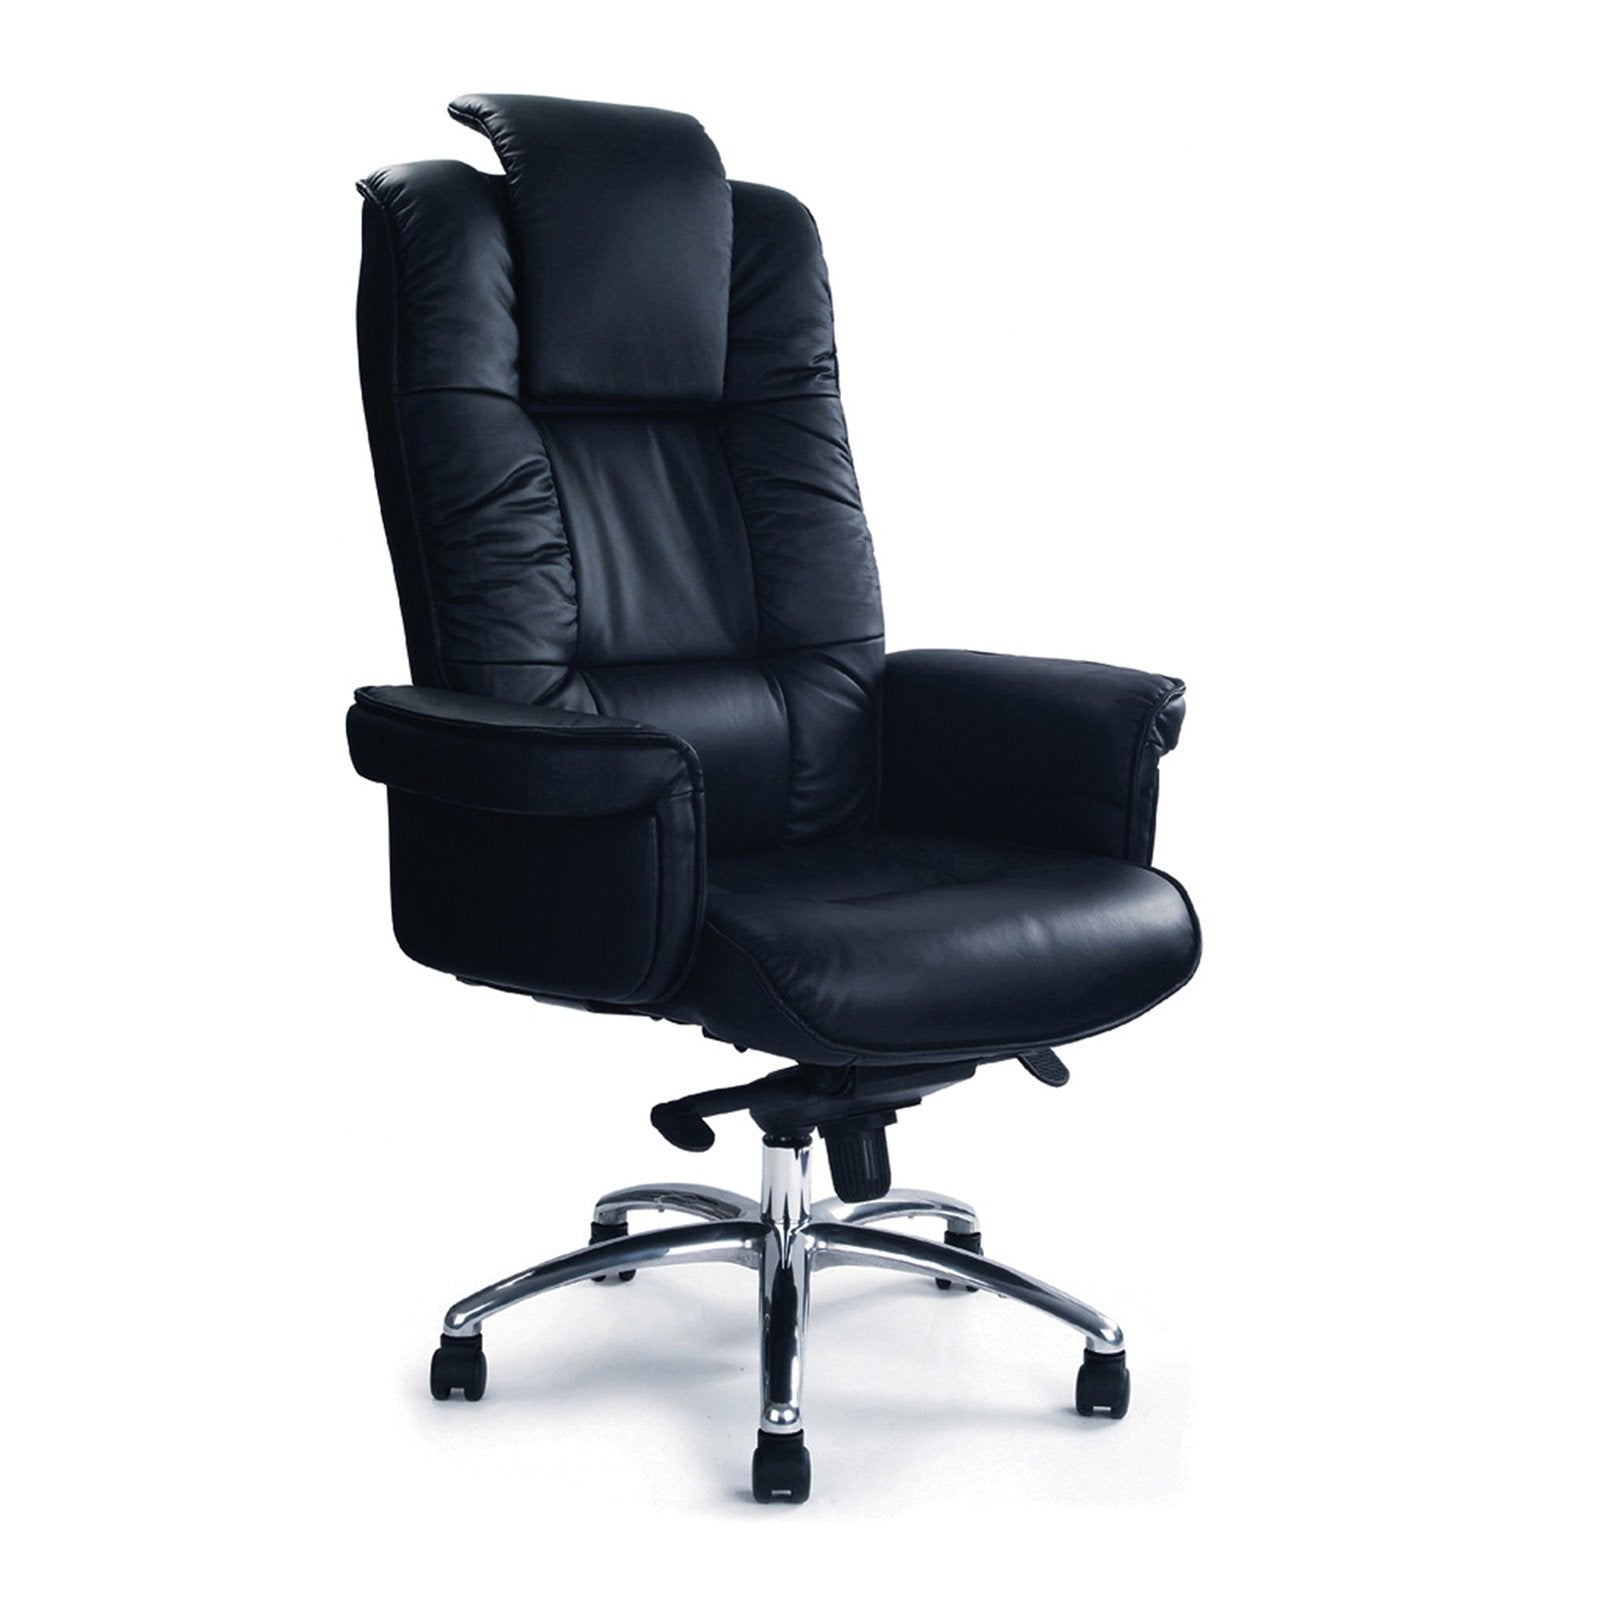 Luxurious High Back Leather Faced Gull-Wing Executive Armchair with Adjustable Headrest and Chrome Base - Black - Office Products Online